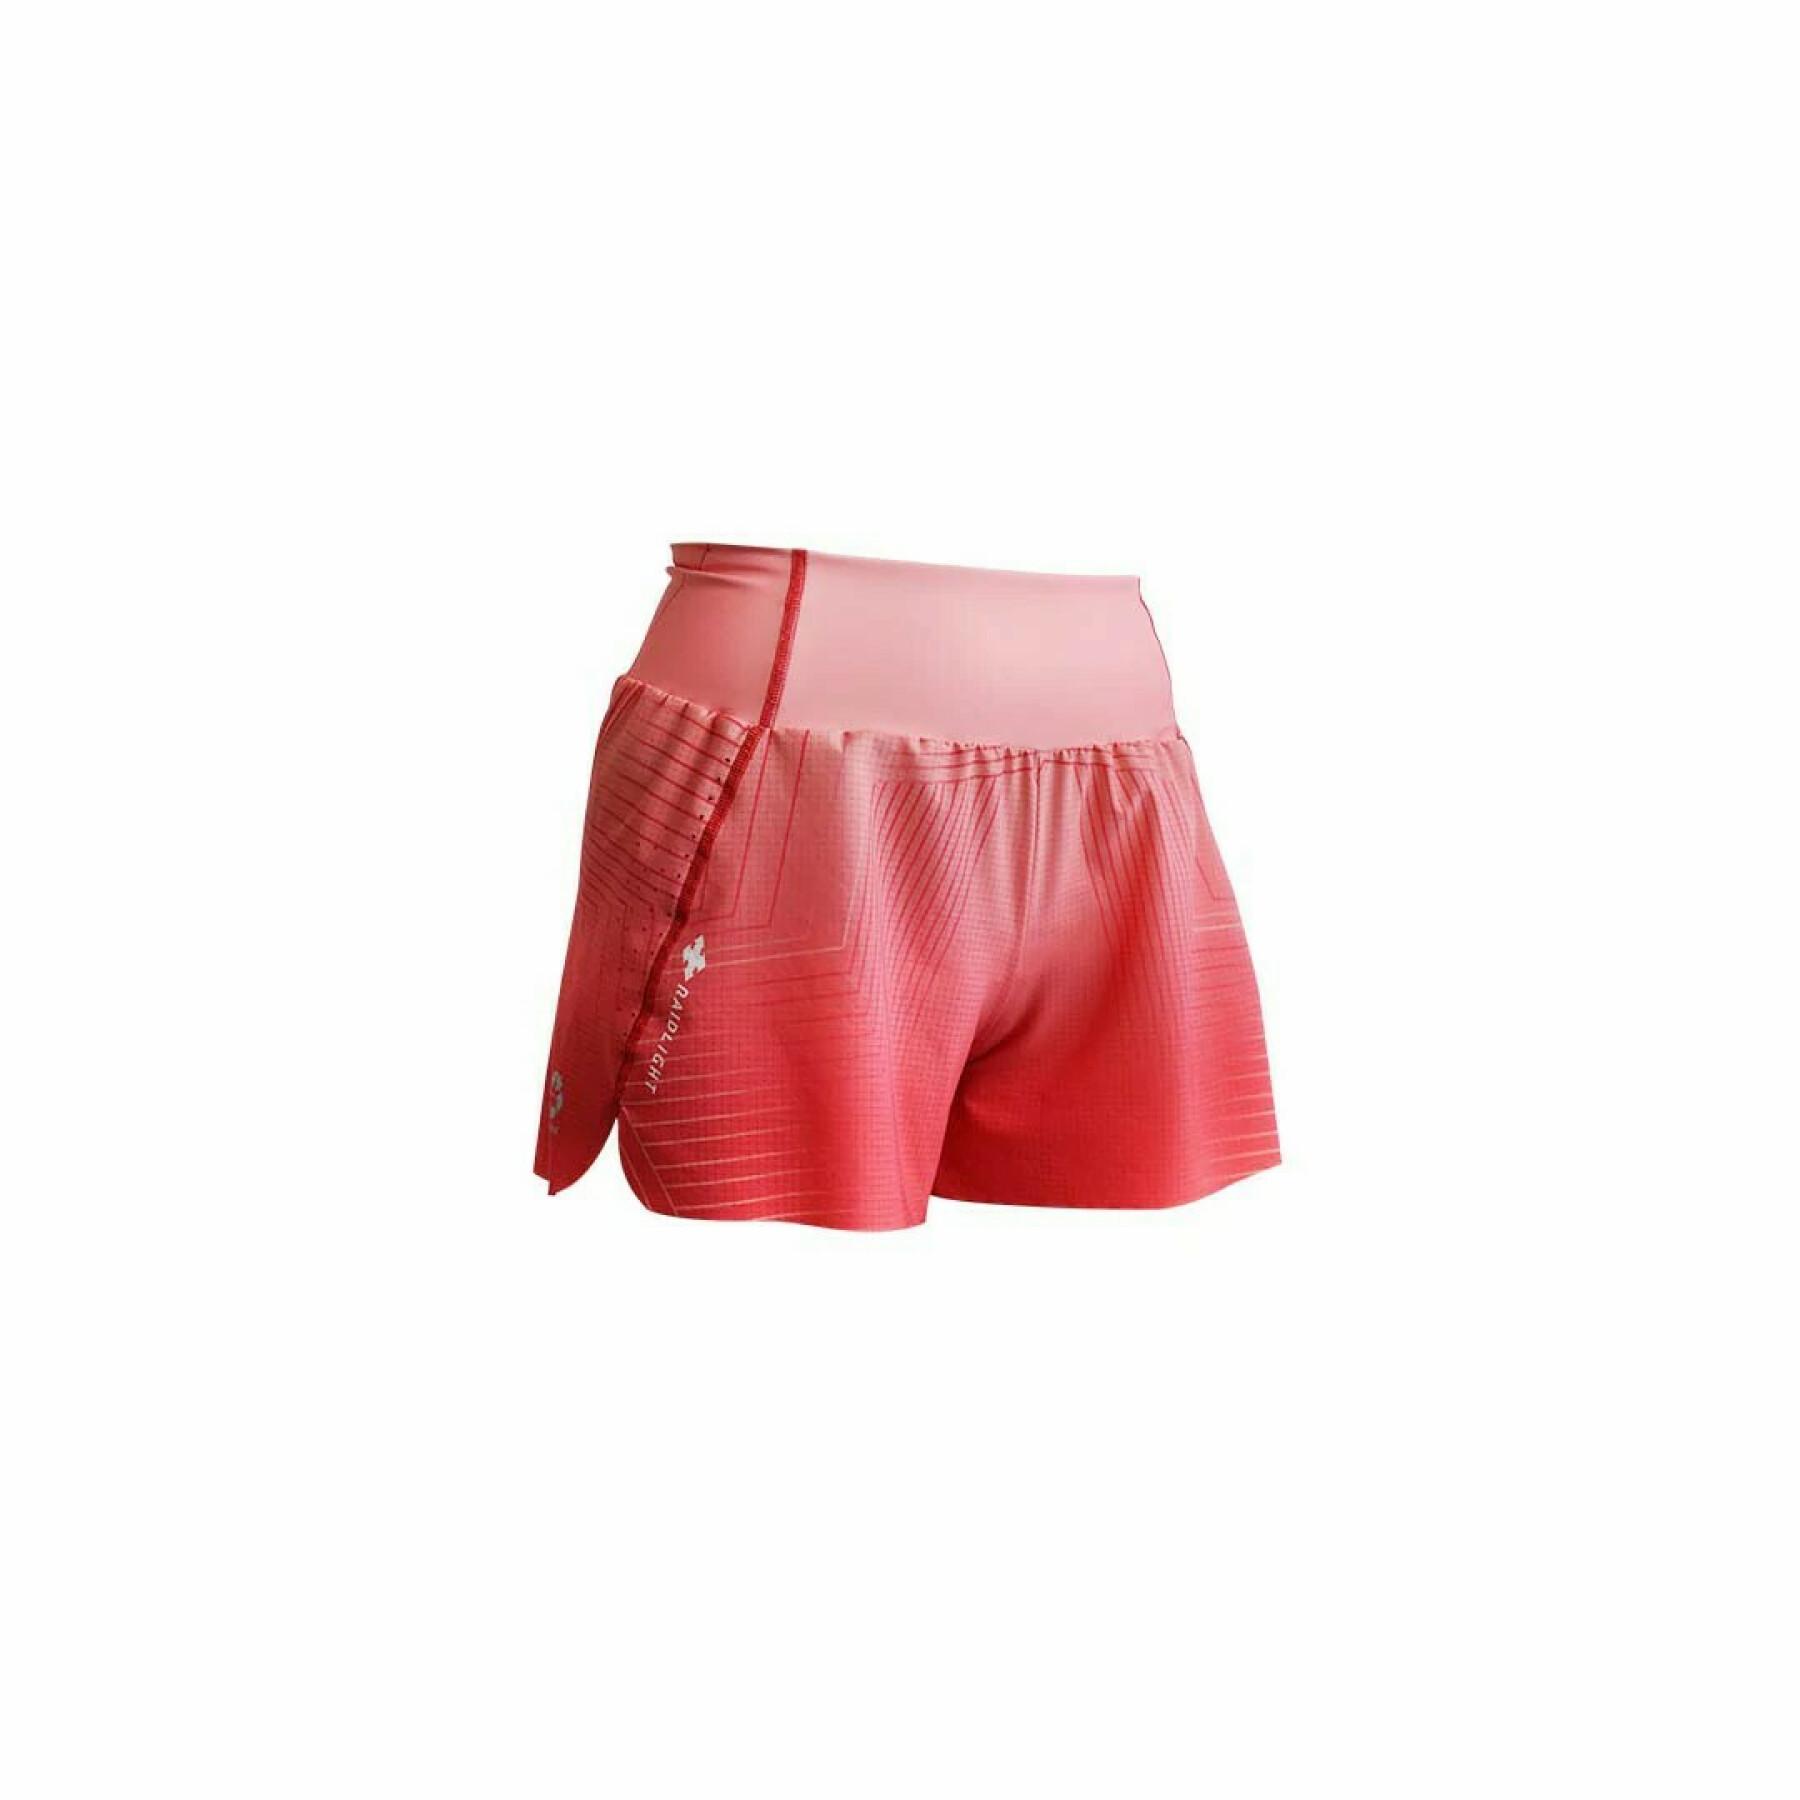 Trailshorts voor dames RaidLight Ripstretch Eco